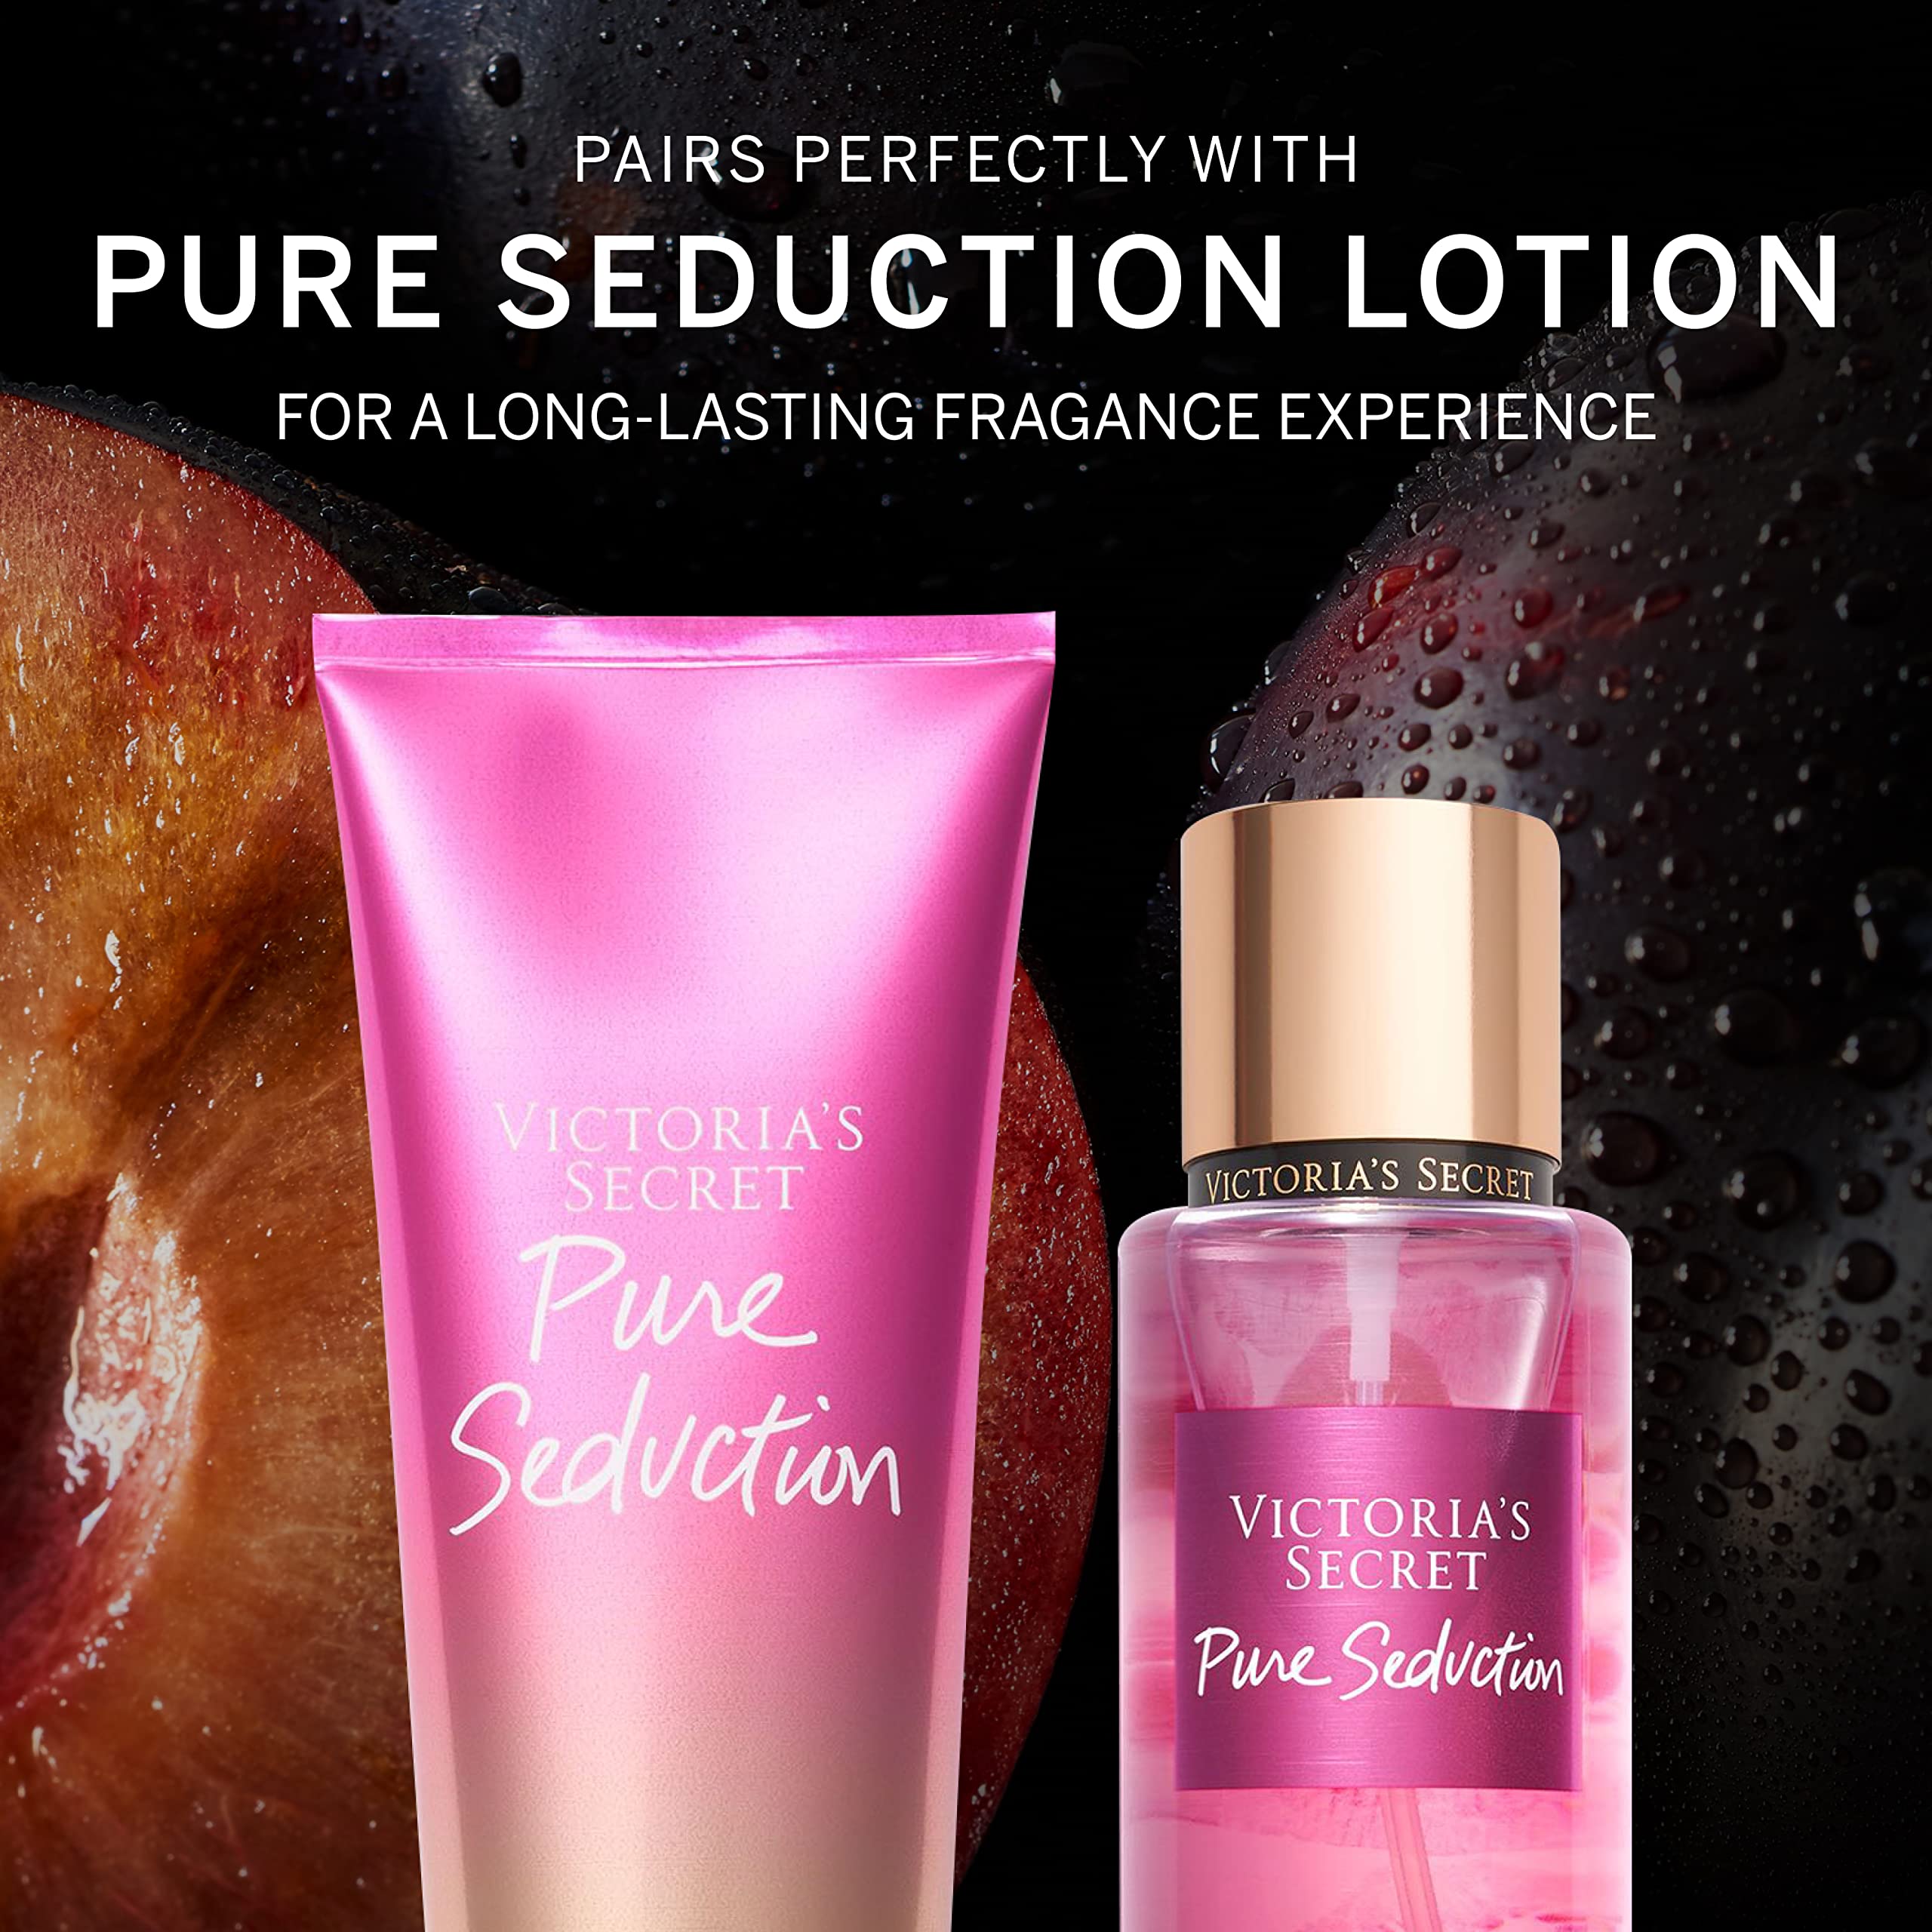 Victoria's Secret Pure Seduction Body Mist for Women, Perfume with Notes of Juiced Plum and Crushed Freesia, Womens Body Spray, All Night Long Women’s Fragrance - 250 ml / 8.4 oz